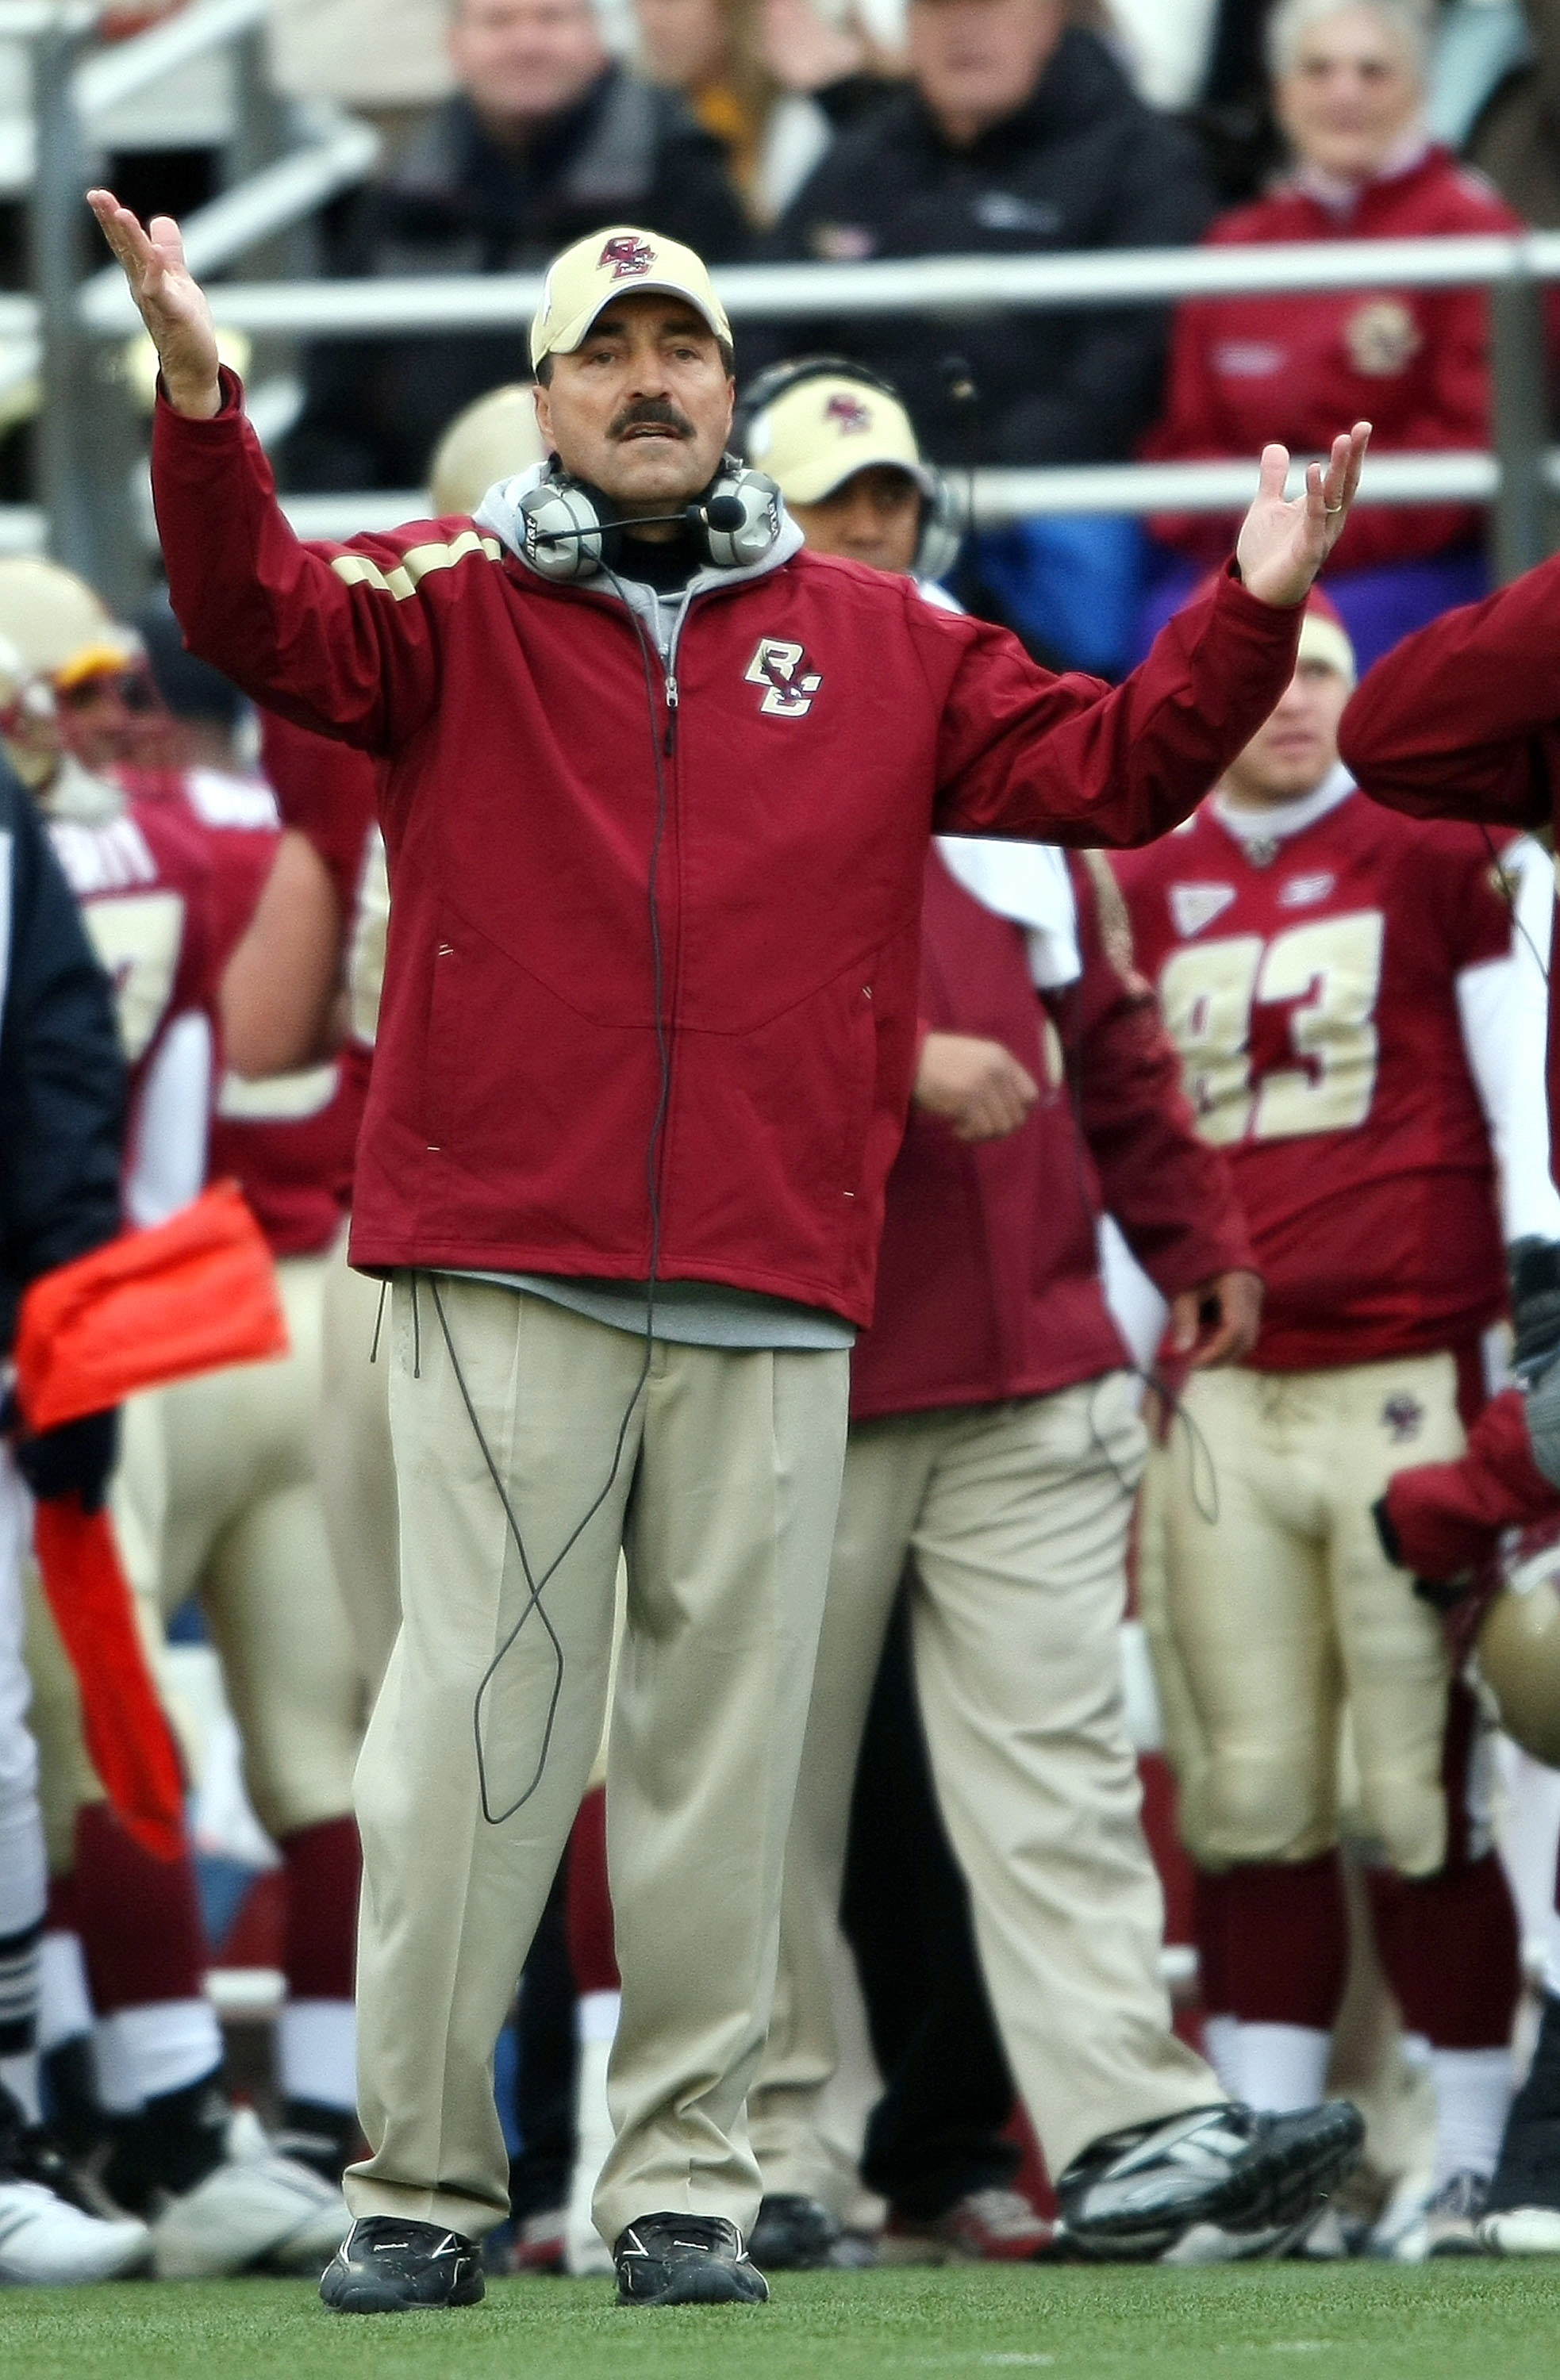 CHESTNUT HILL, MA - OCTOBER 17:  Head coach Frank Spaziani of the Boston College Eagles reacts after he thought a call should have been made against  the North Carolina State Wolf Pack in the first half on October 17, 2009 at Alumni Stadium in Chestnut Hi